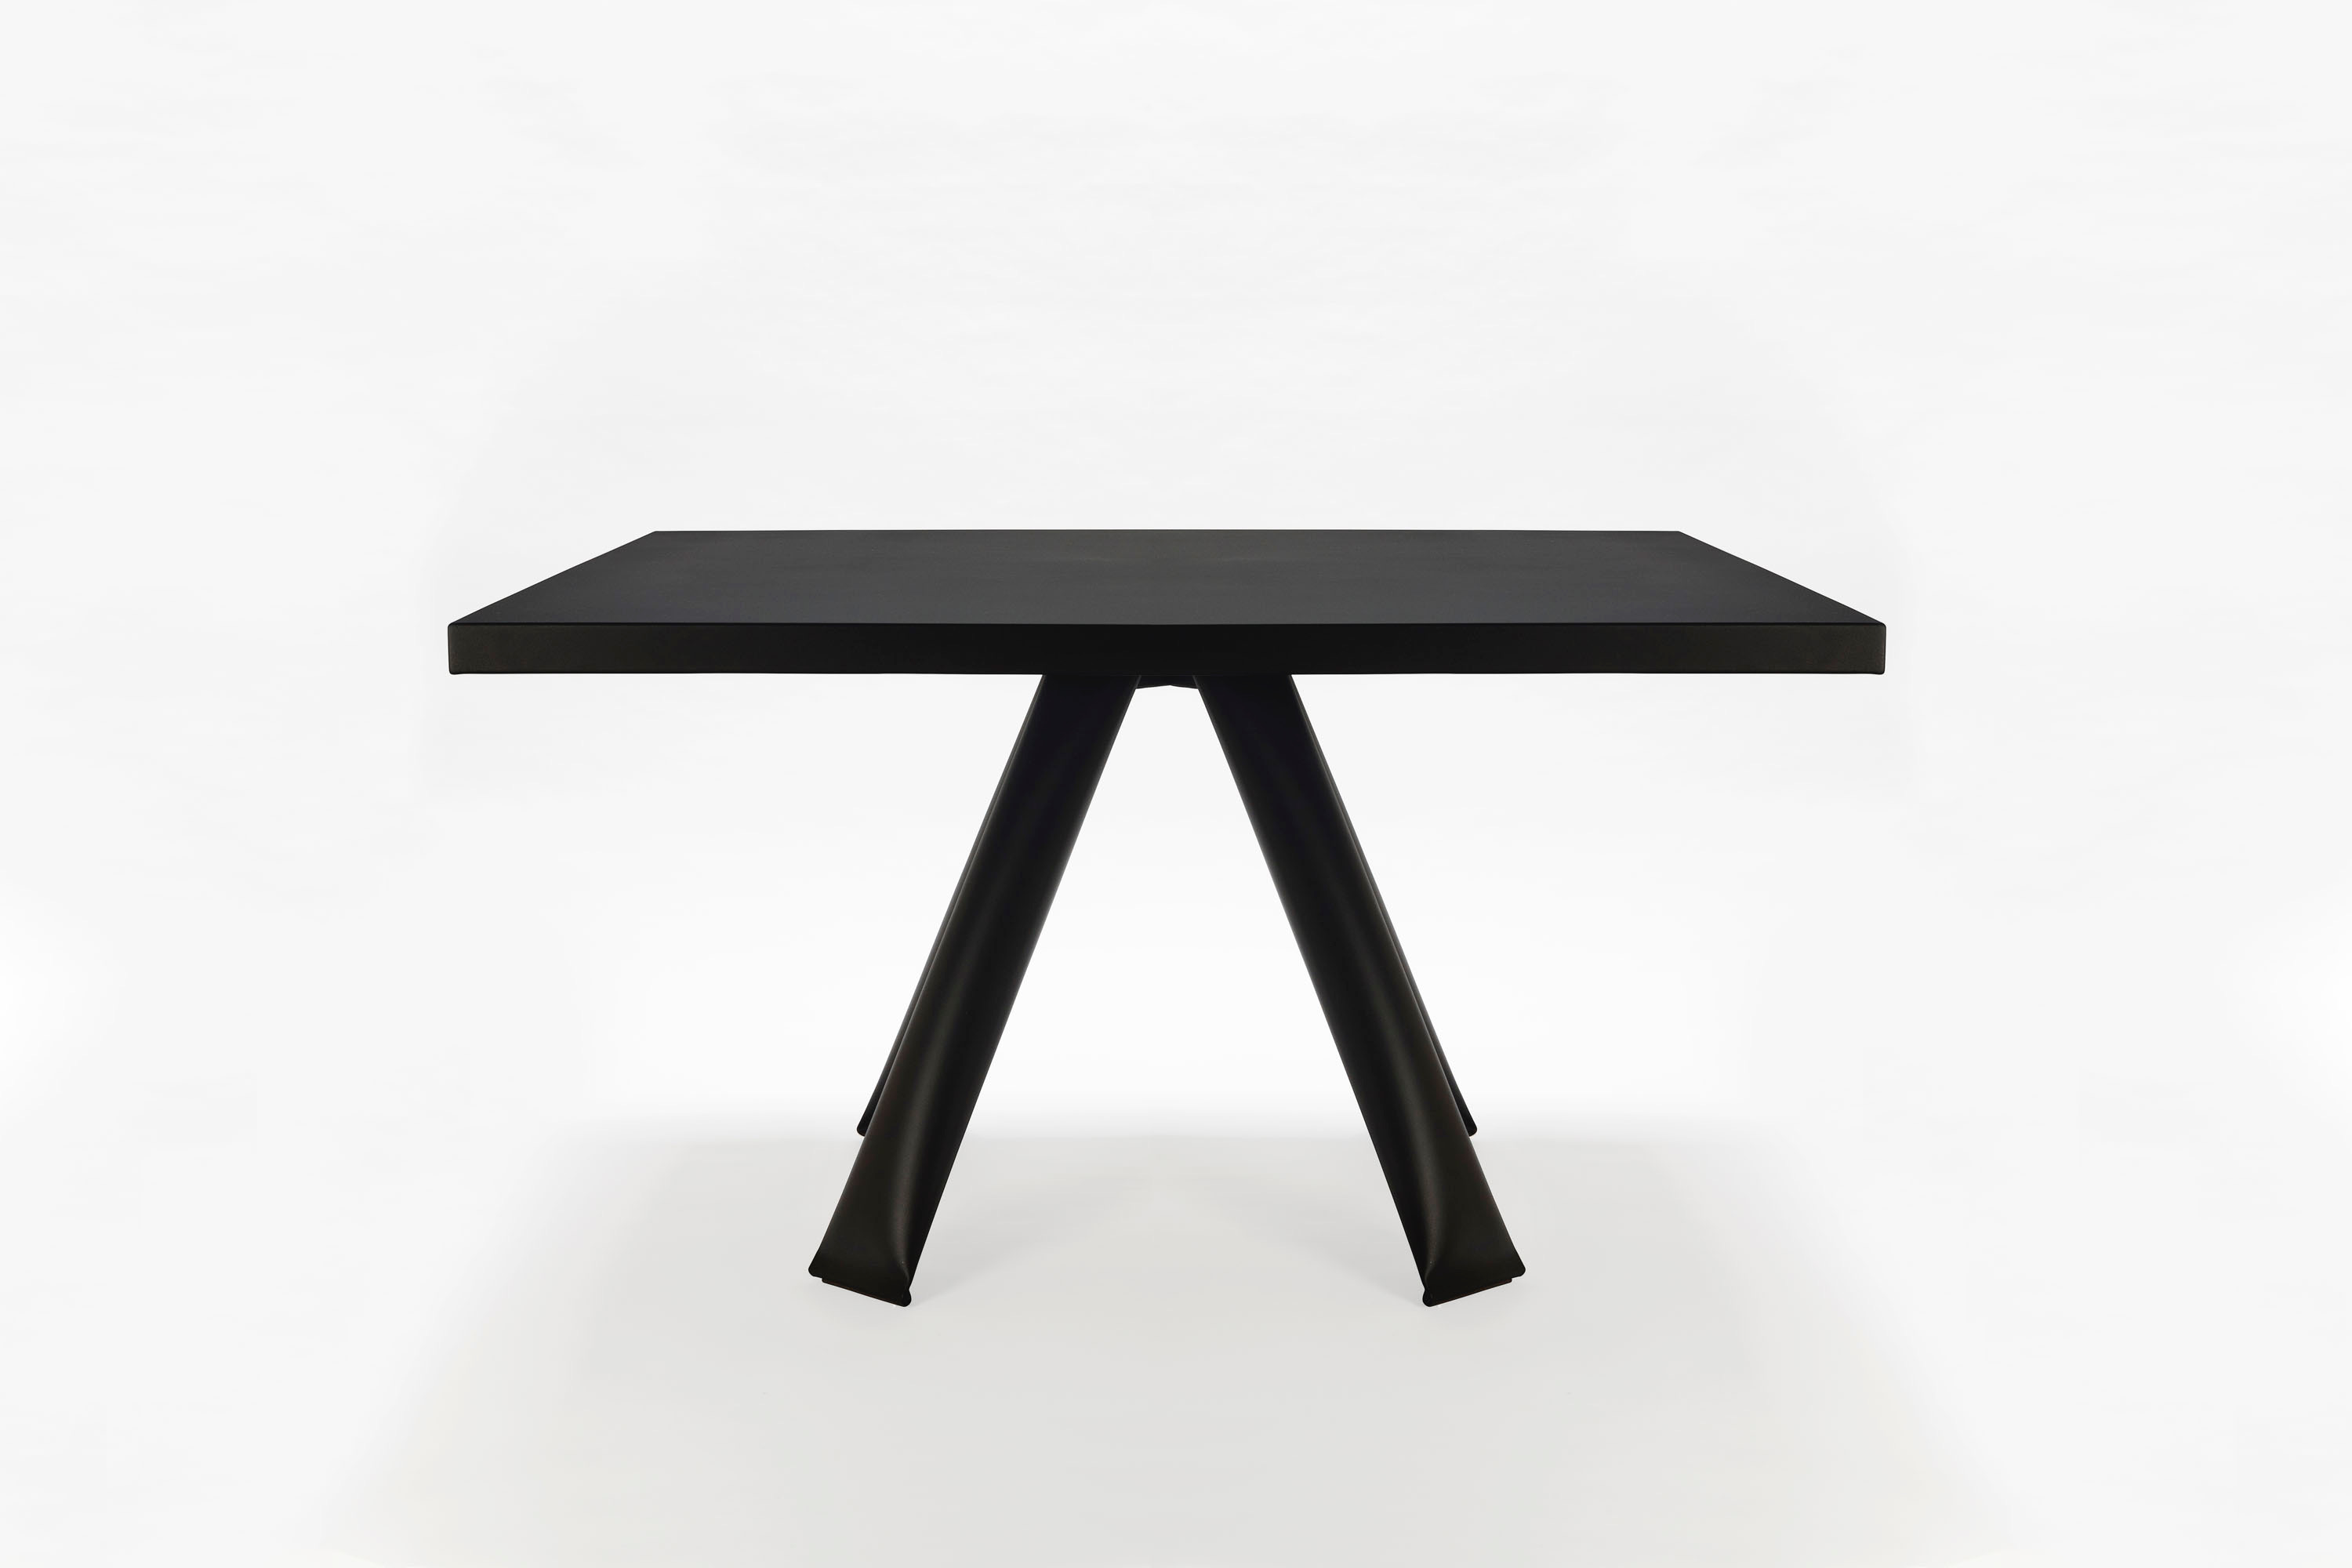 Tubus square table for private home